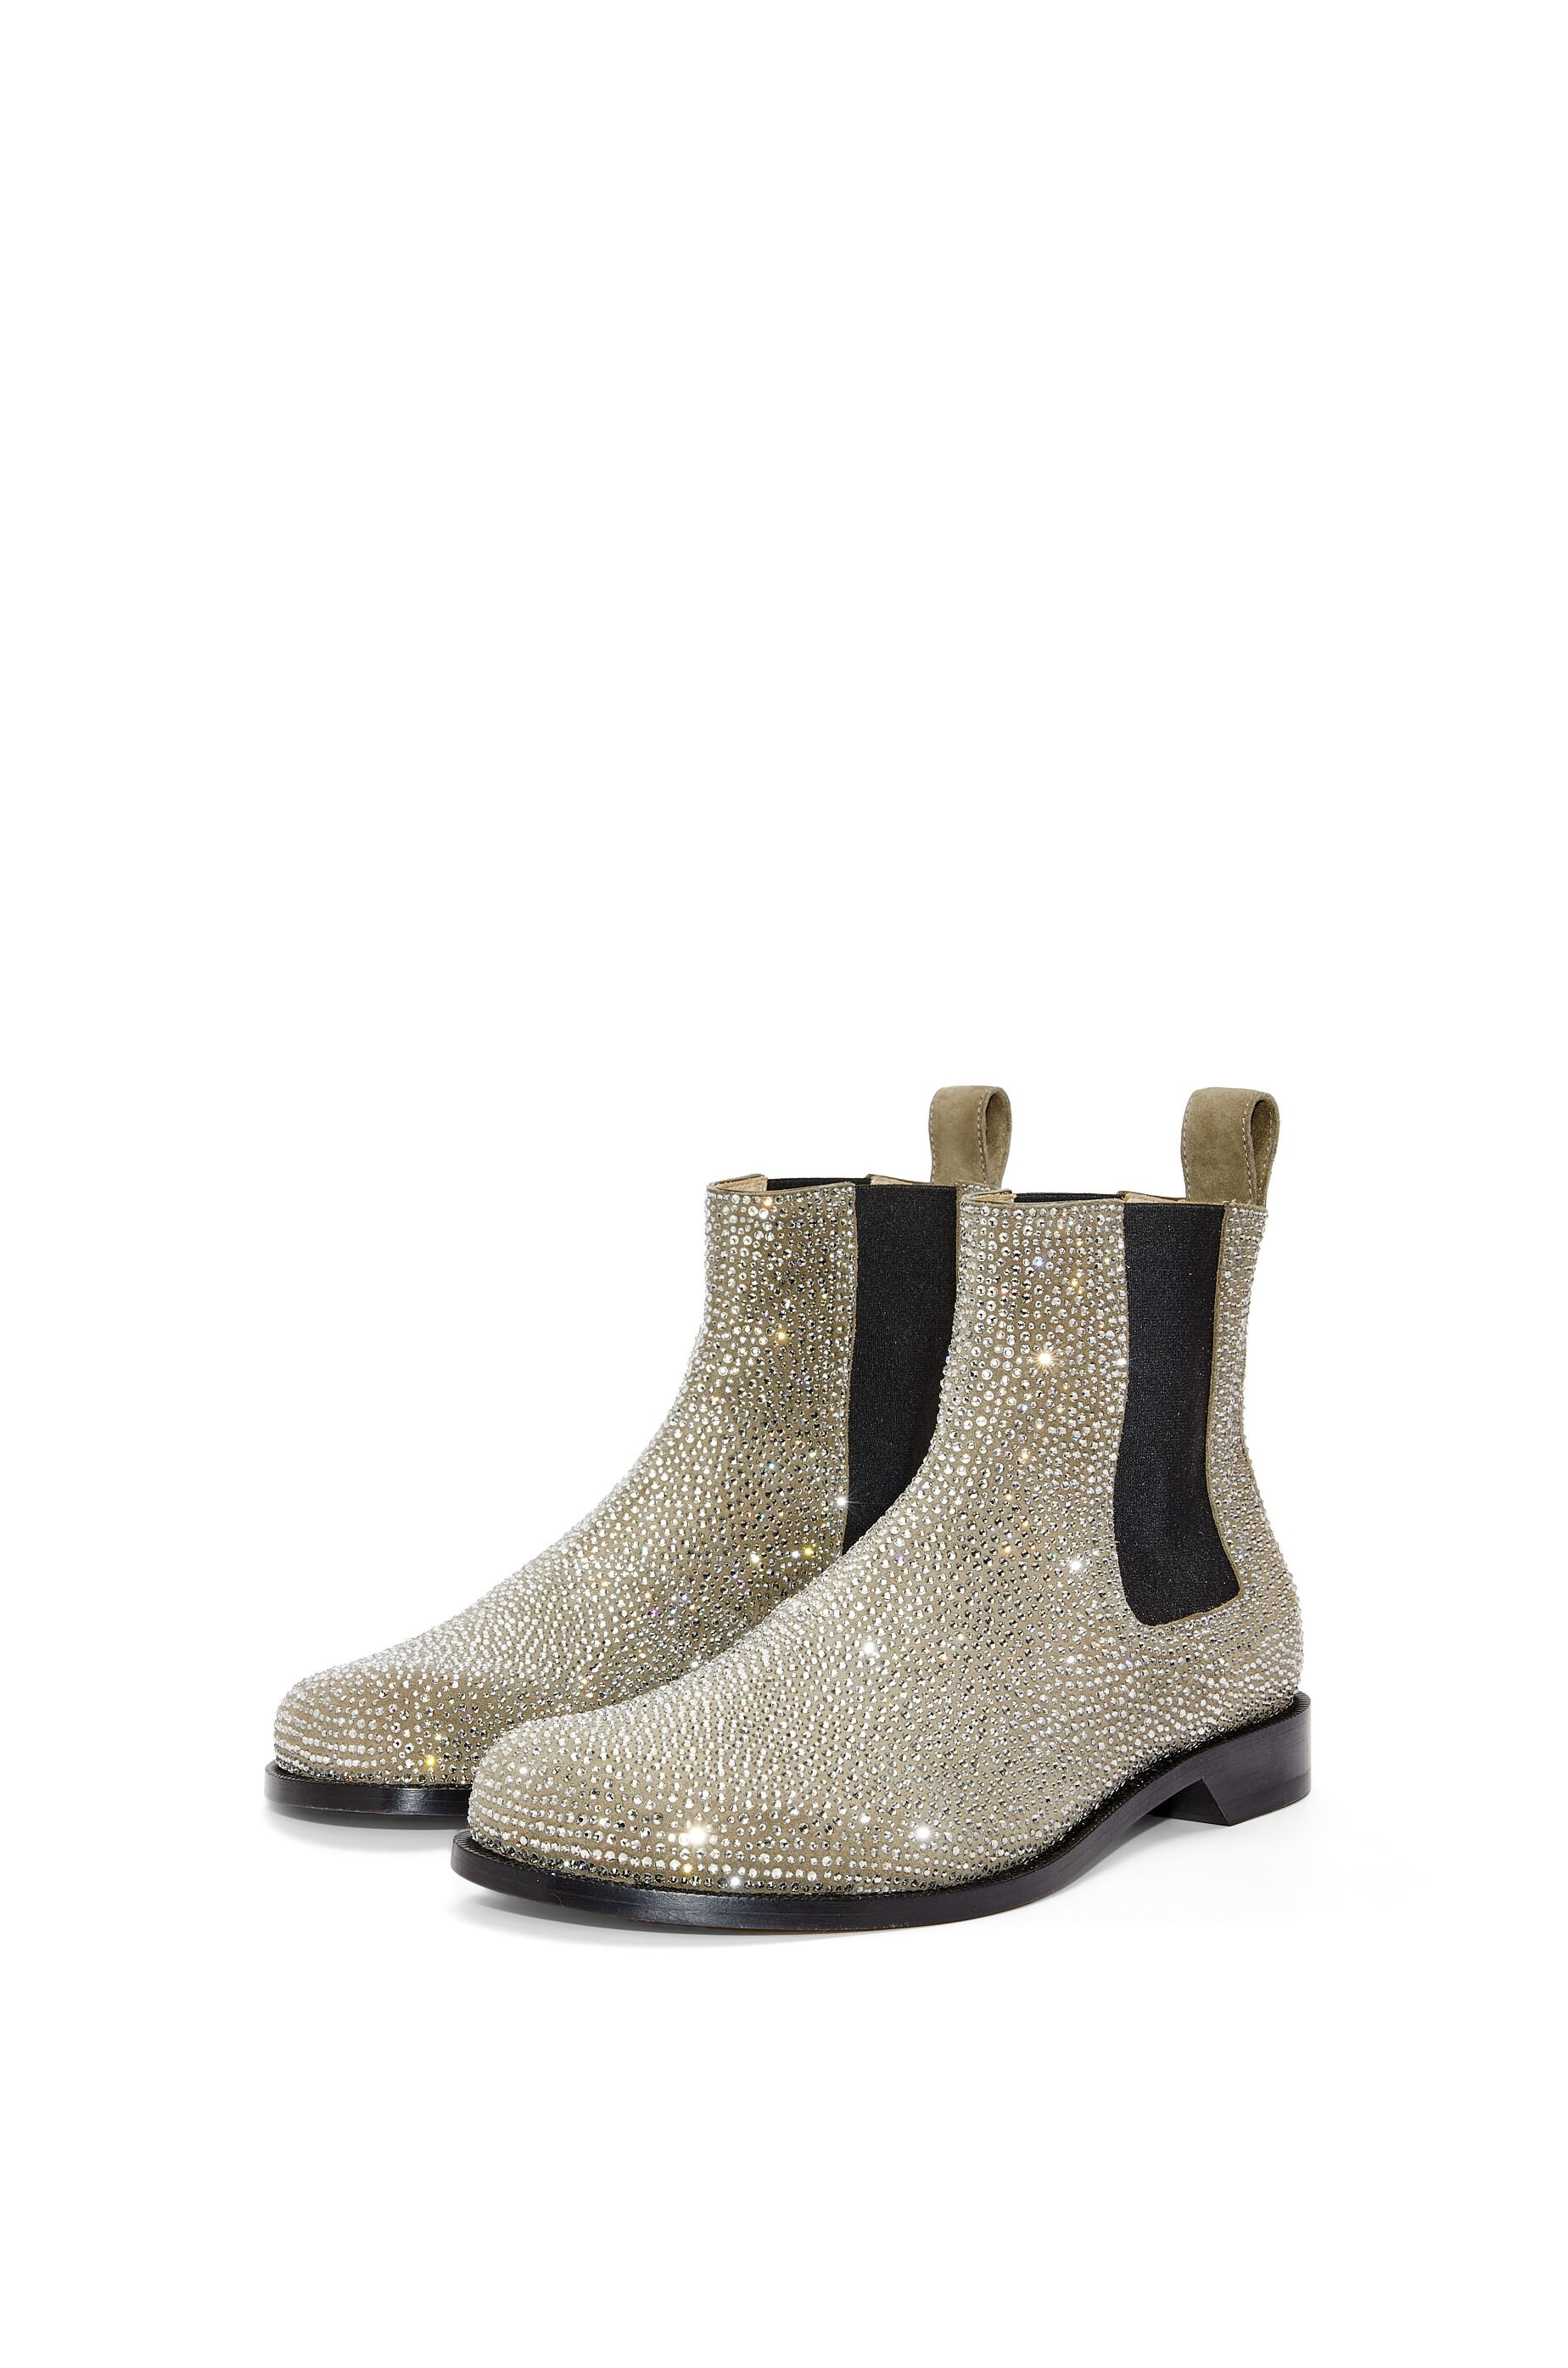 Campo Chelsea boot in suede calfskin and rhinestones - 2